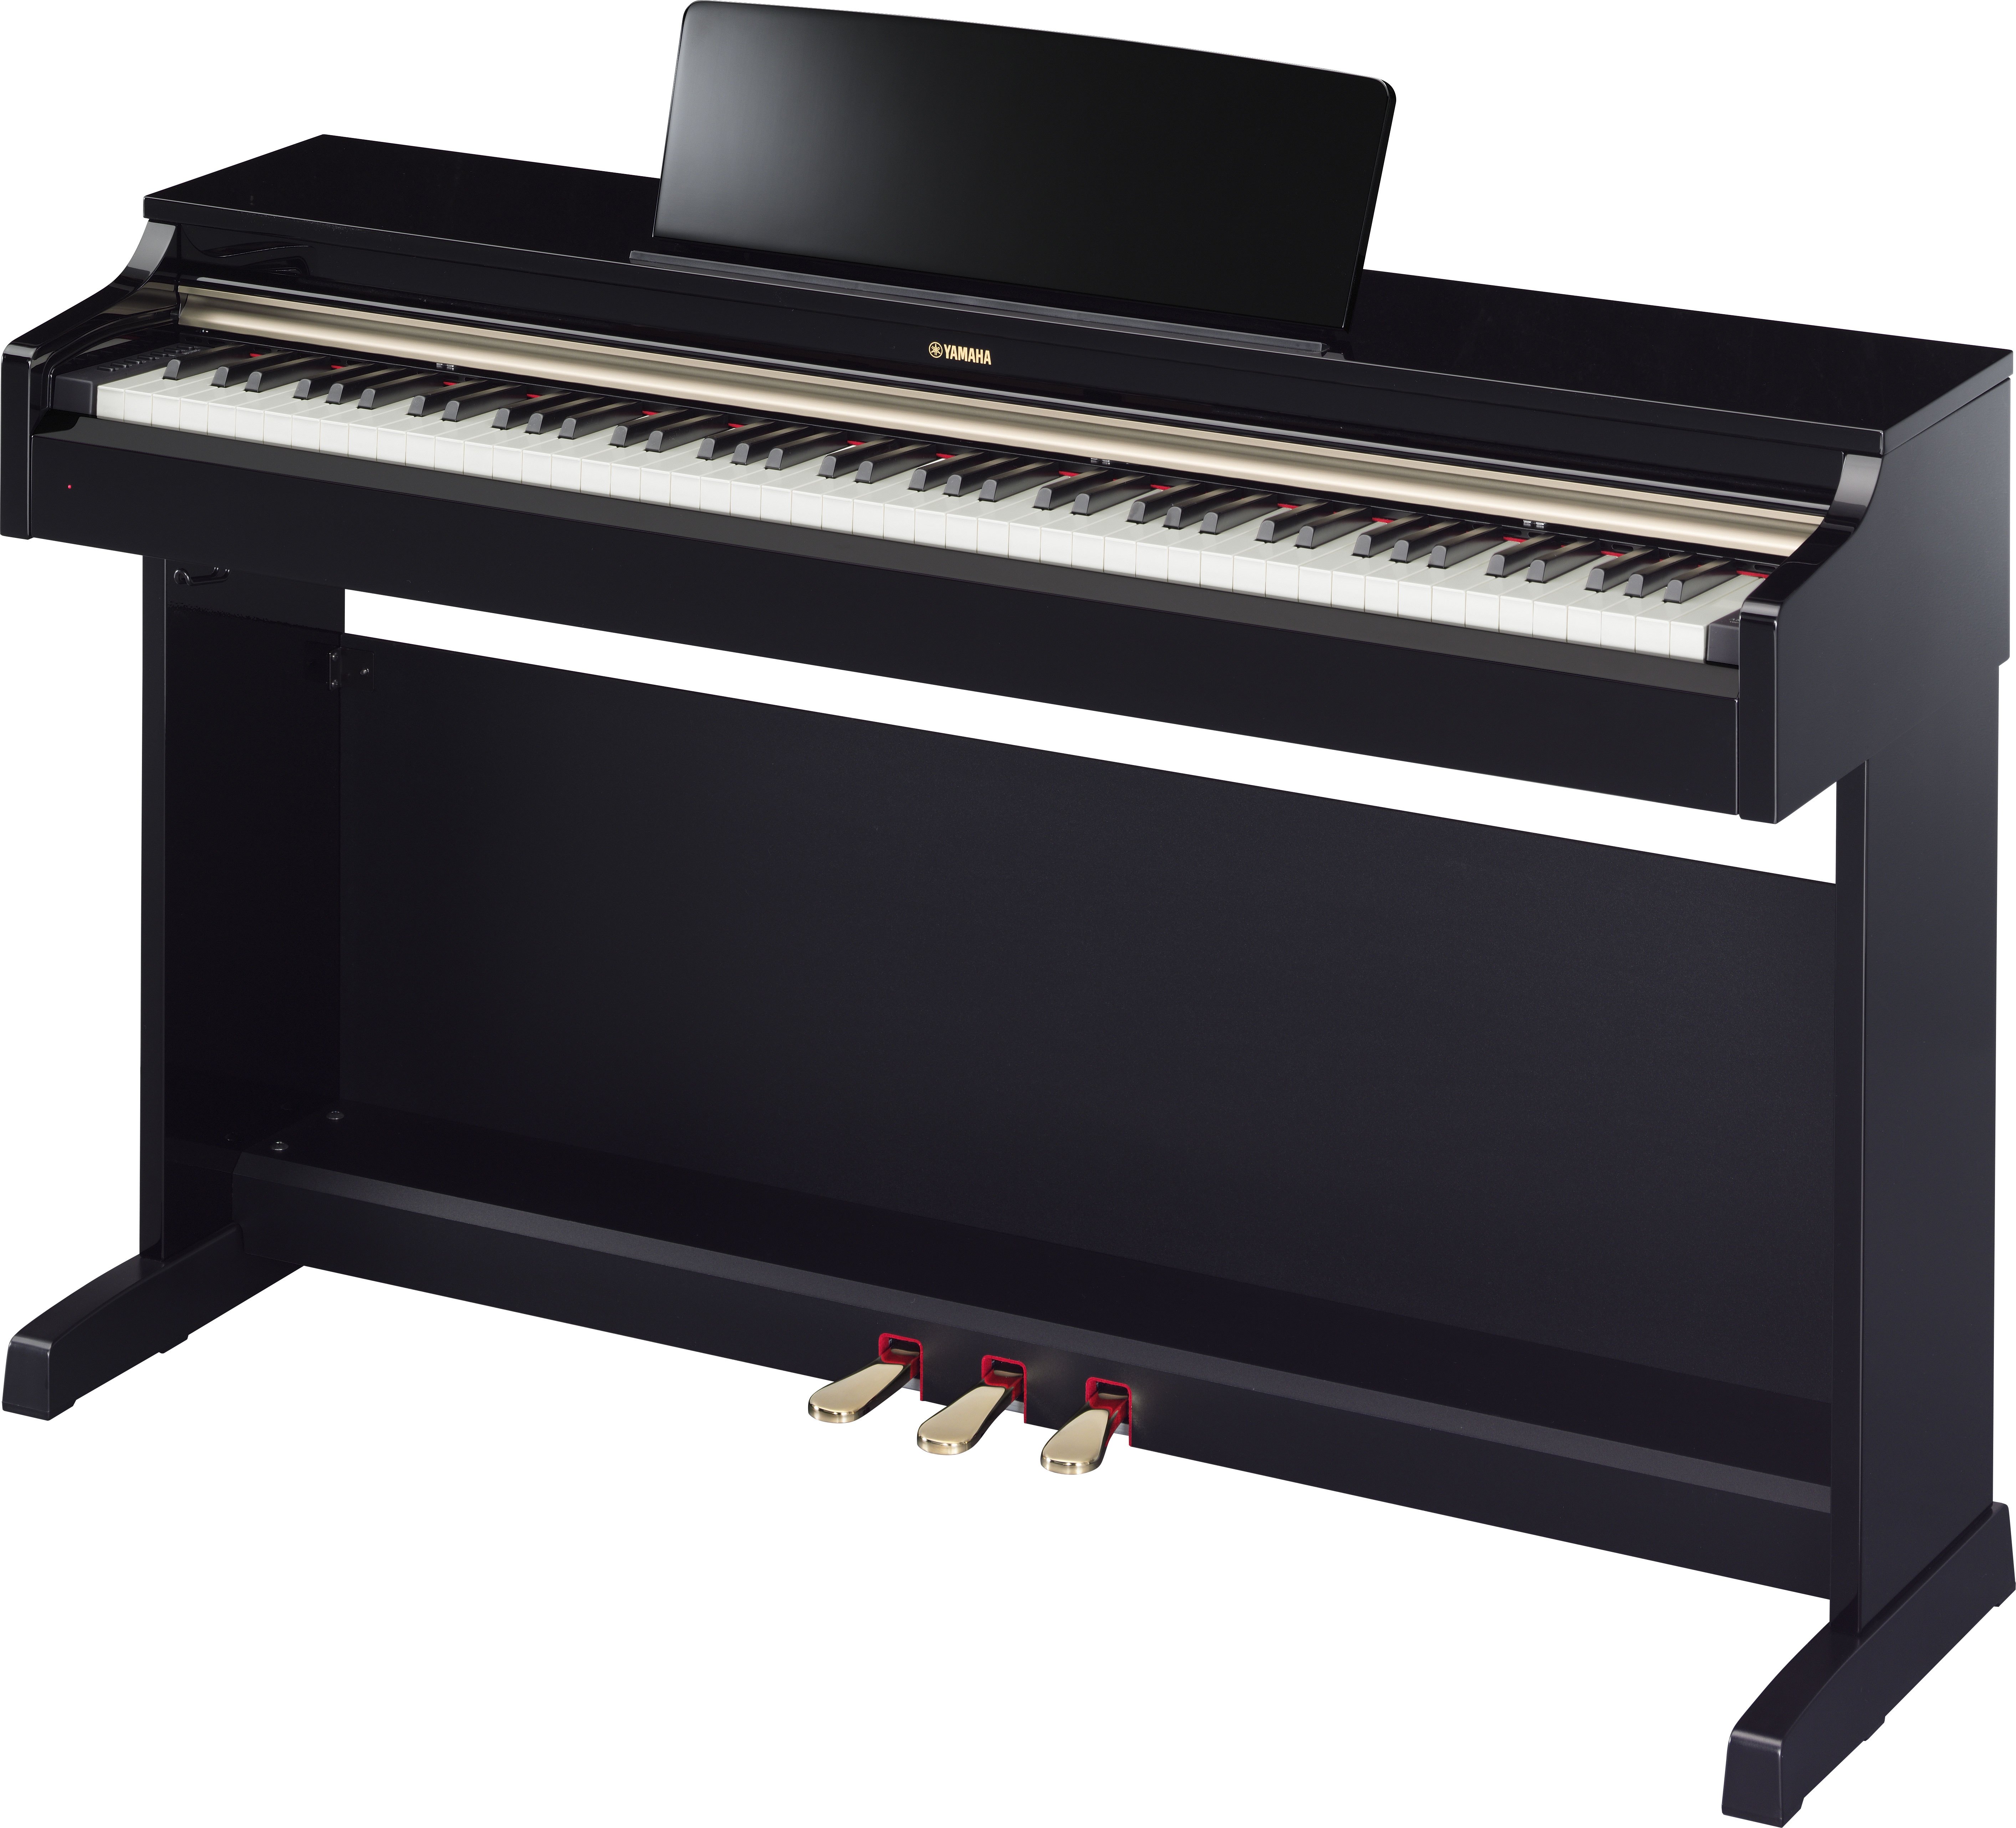 YDP-162 - Overview - ARIUS - Pianos - Musical Instruments